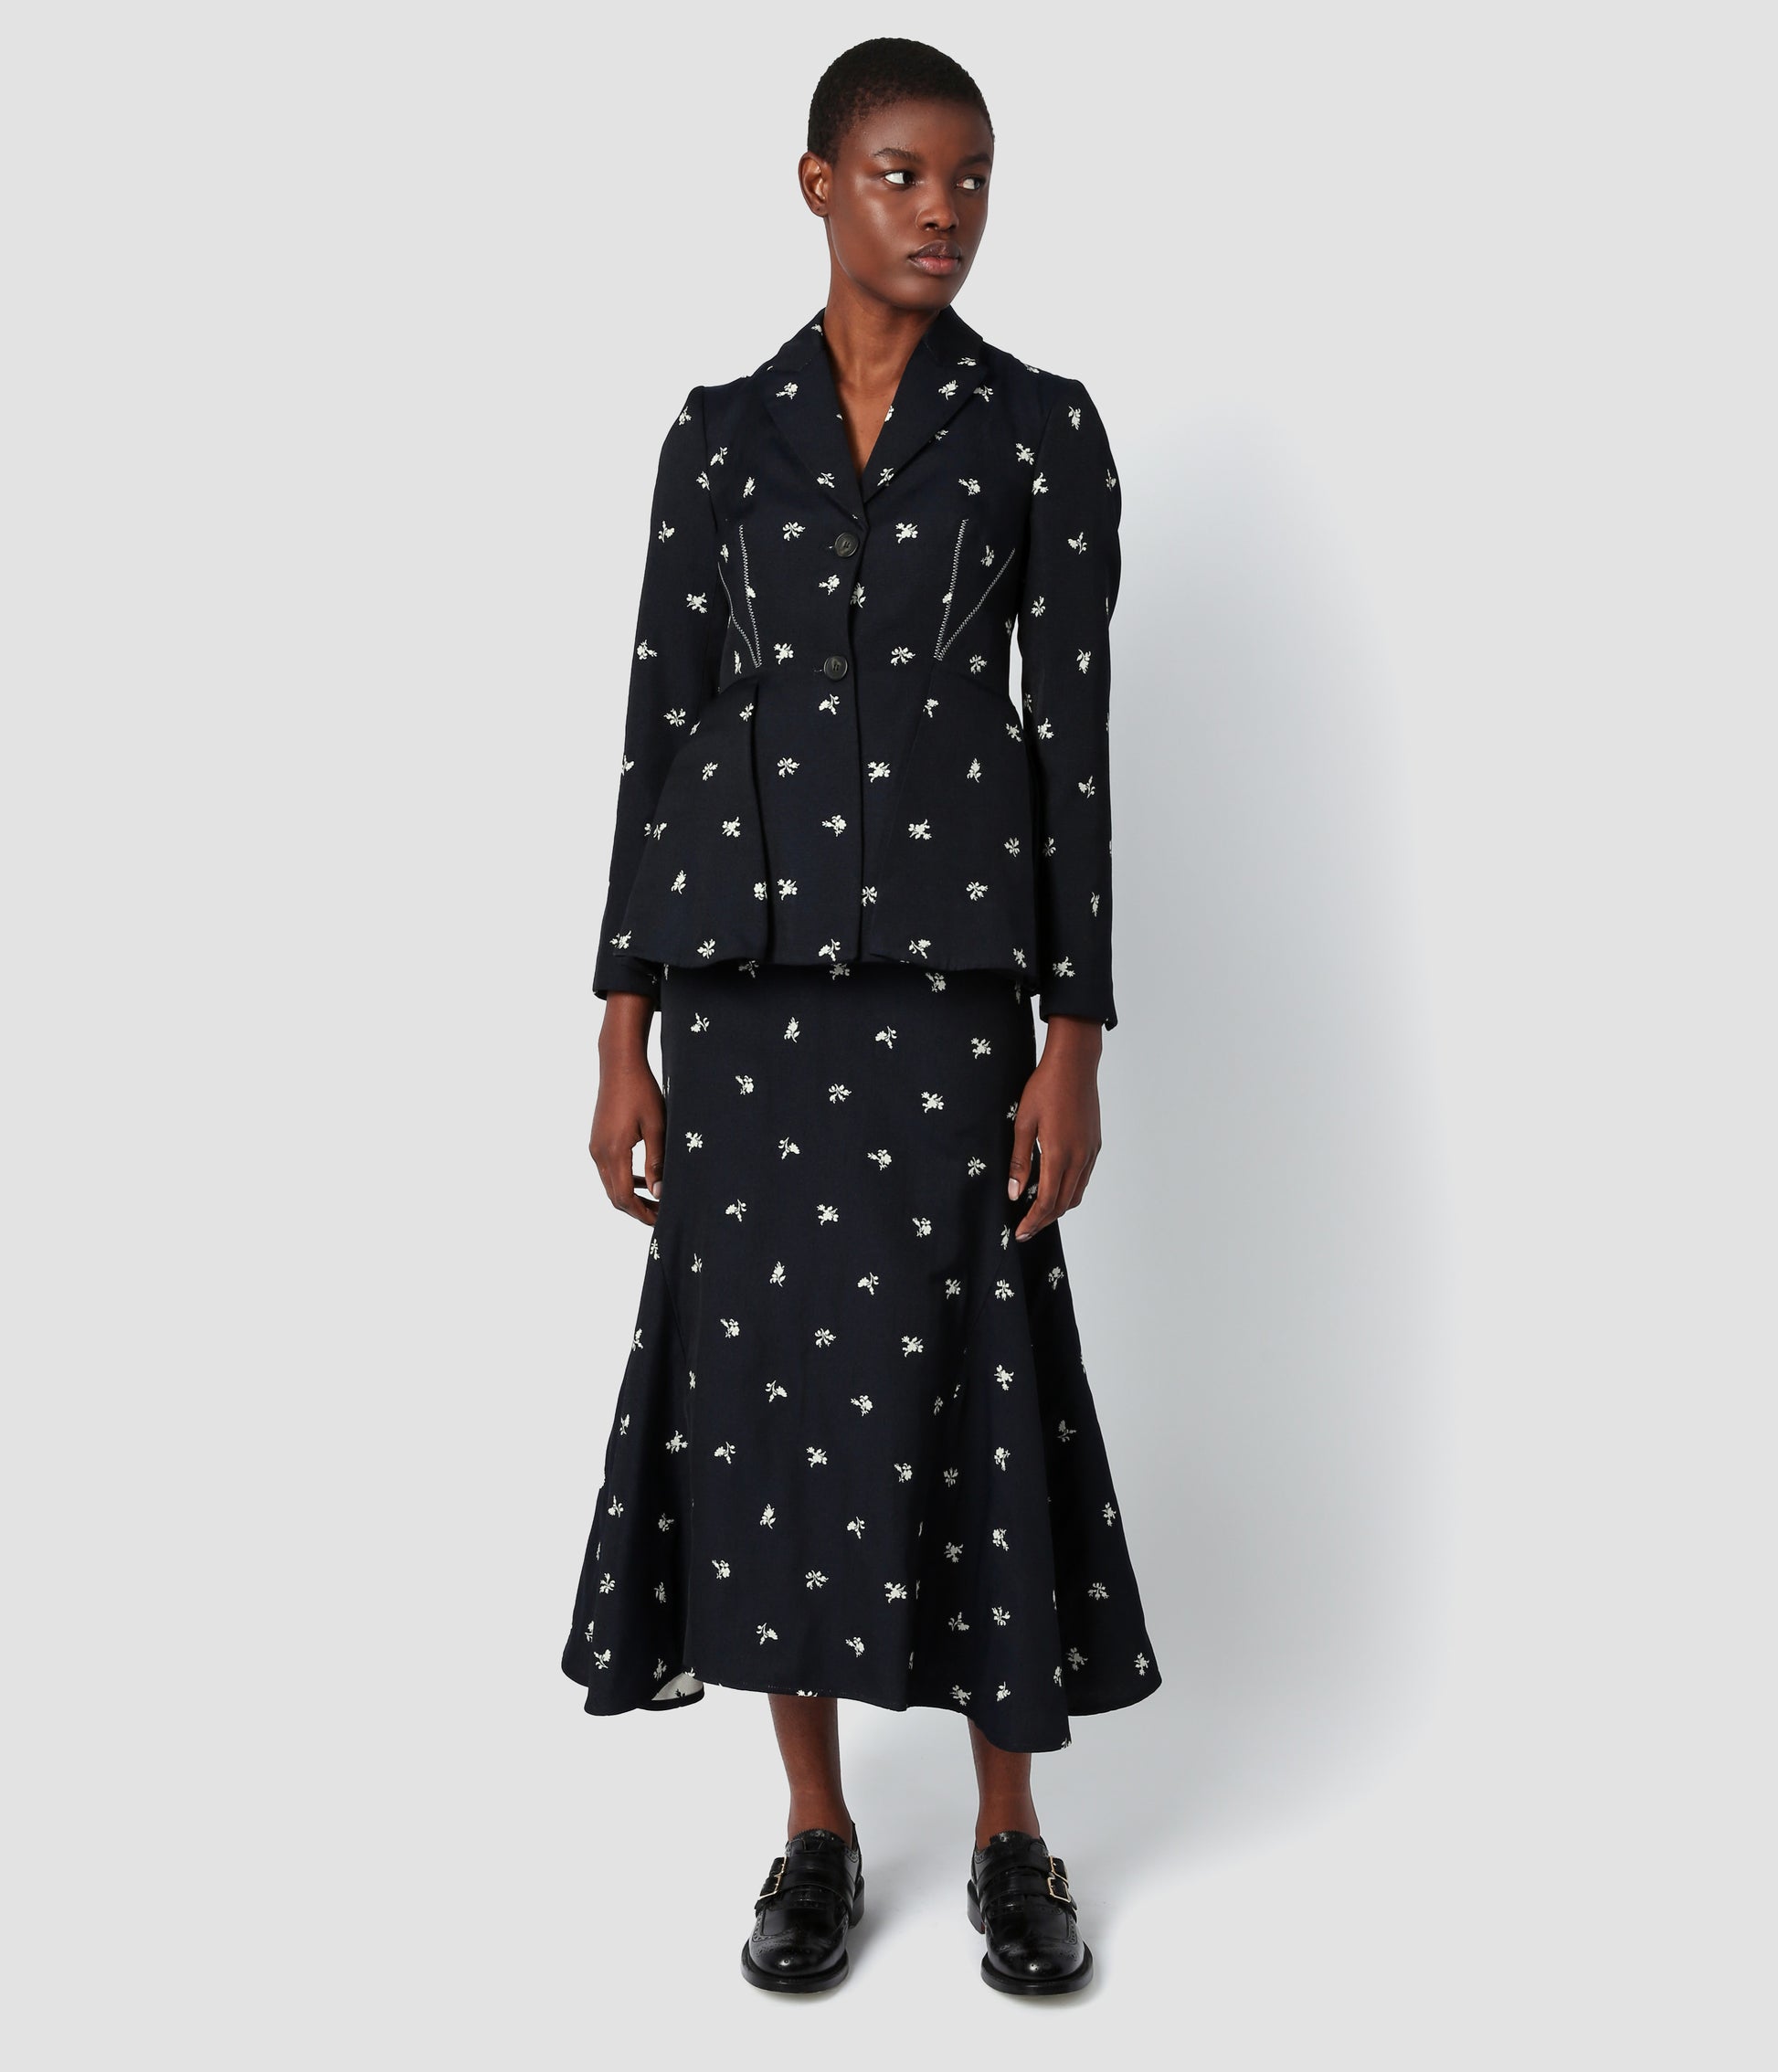 Flared skirt in a navy jacquard with a white ditsy floral print. The skirt is fitted over the hips but flares out to give an A-line silhouette.